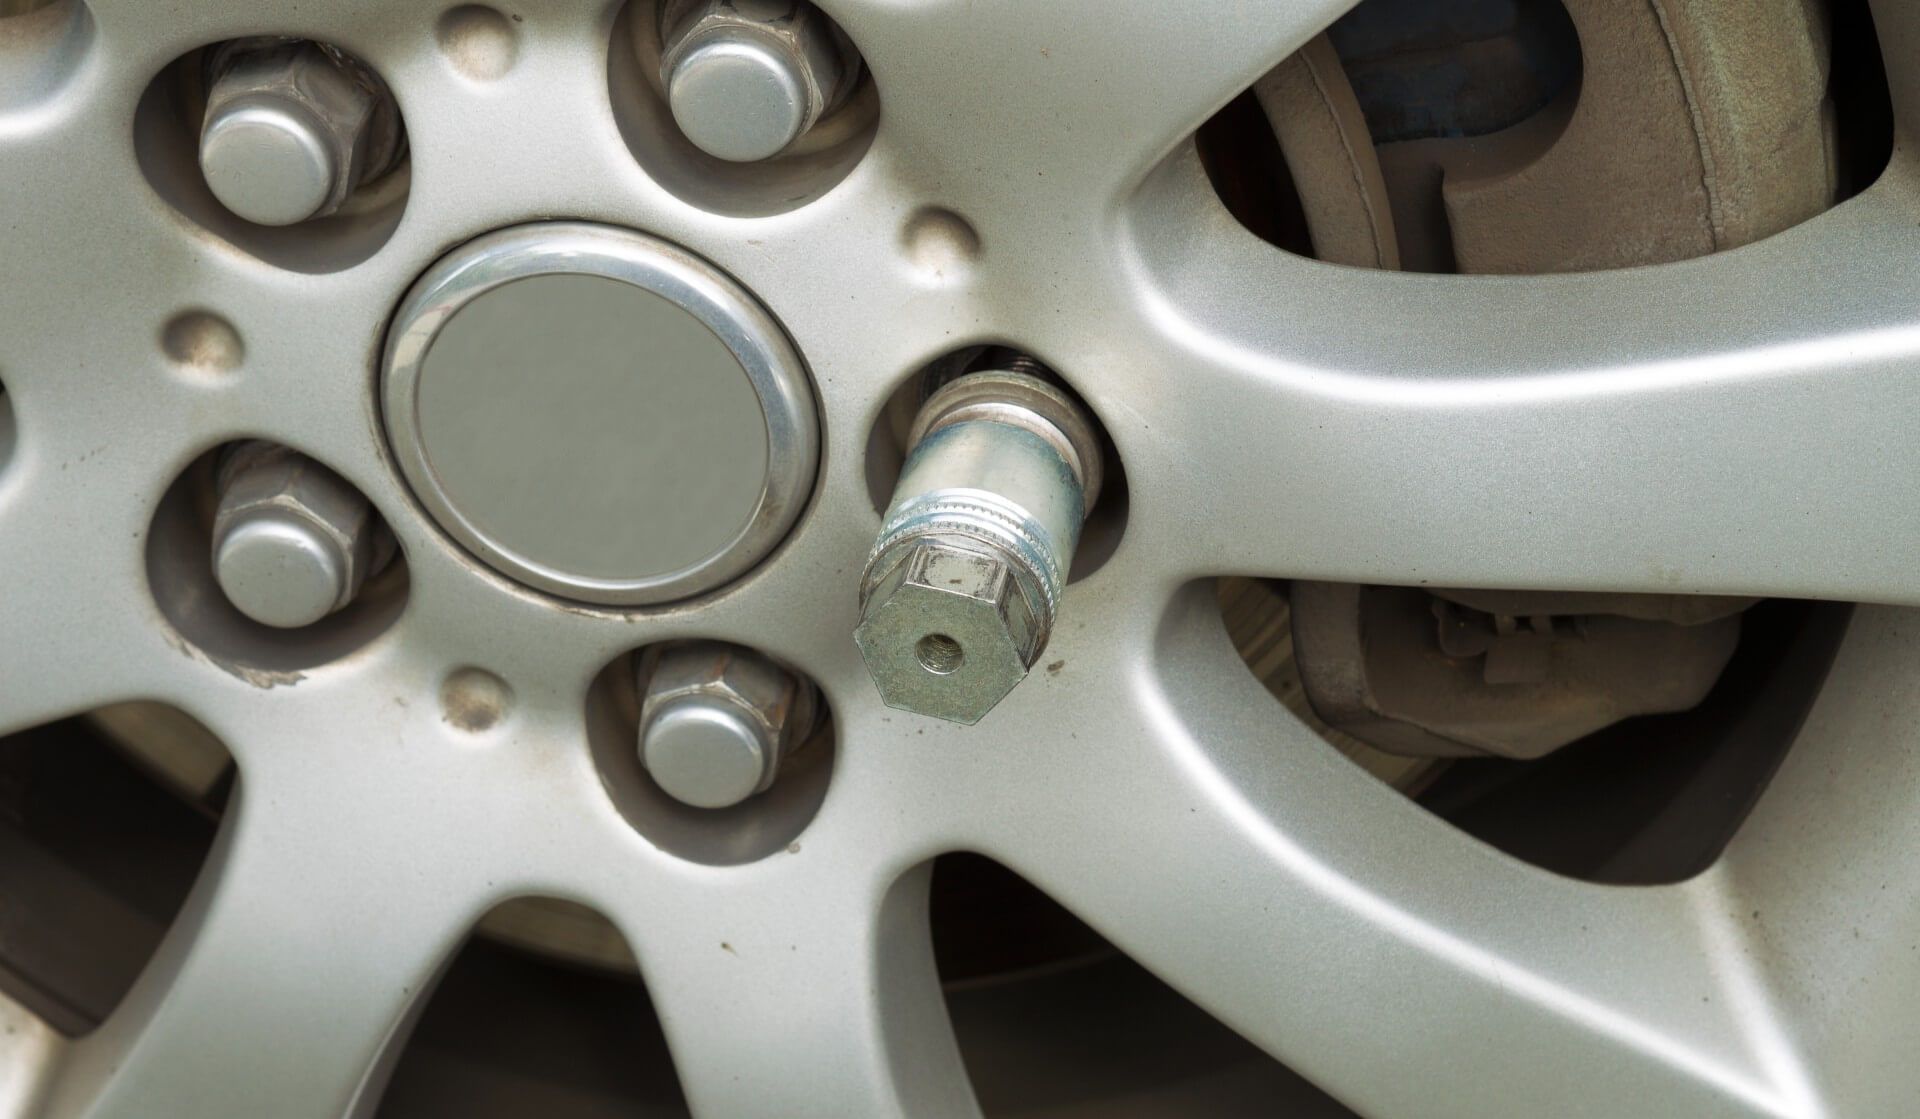 Know all about wheel locks and lock keys to protect your tires and access to them